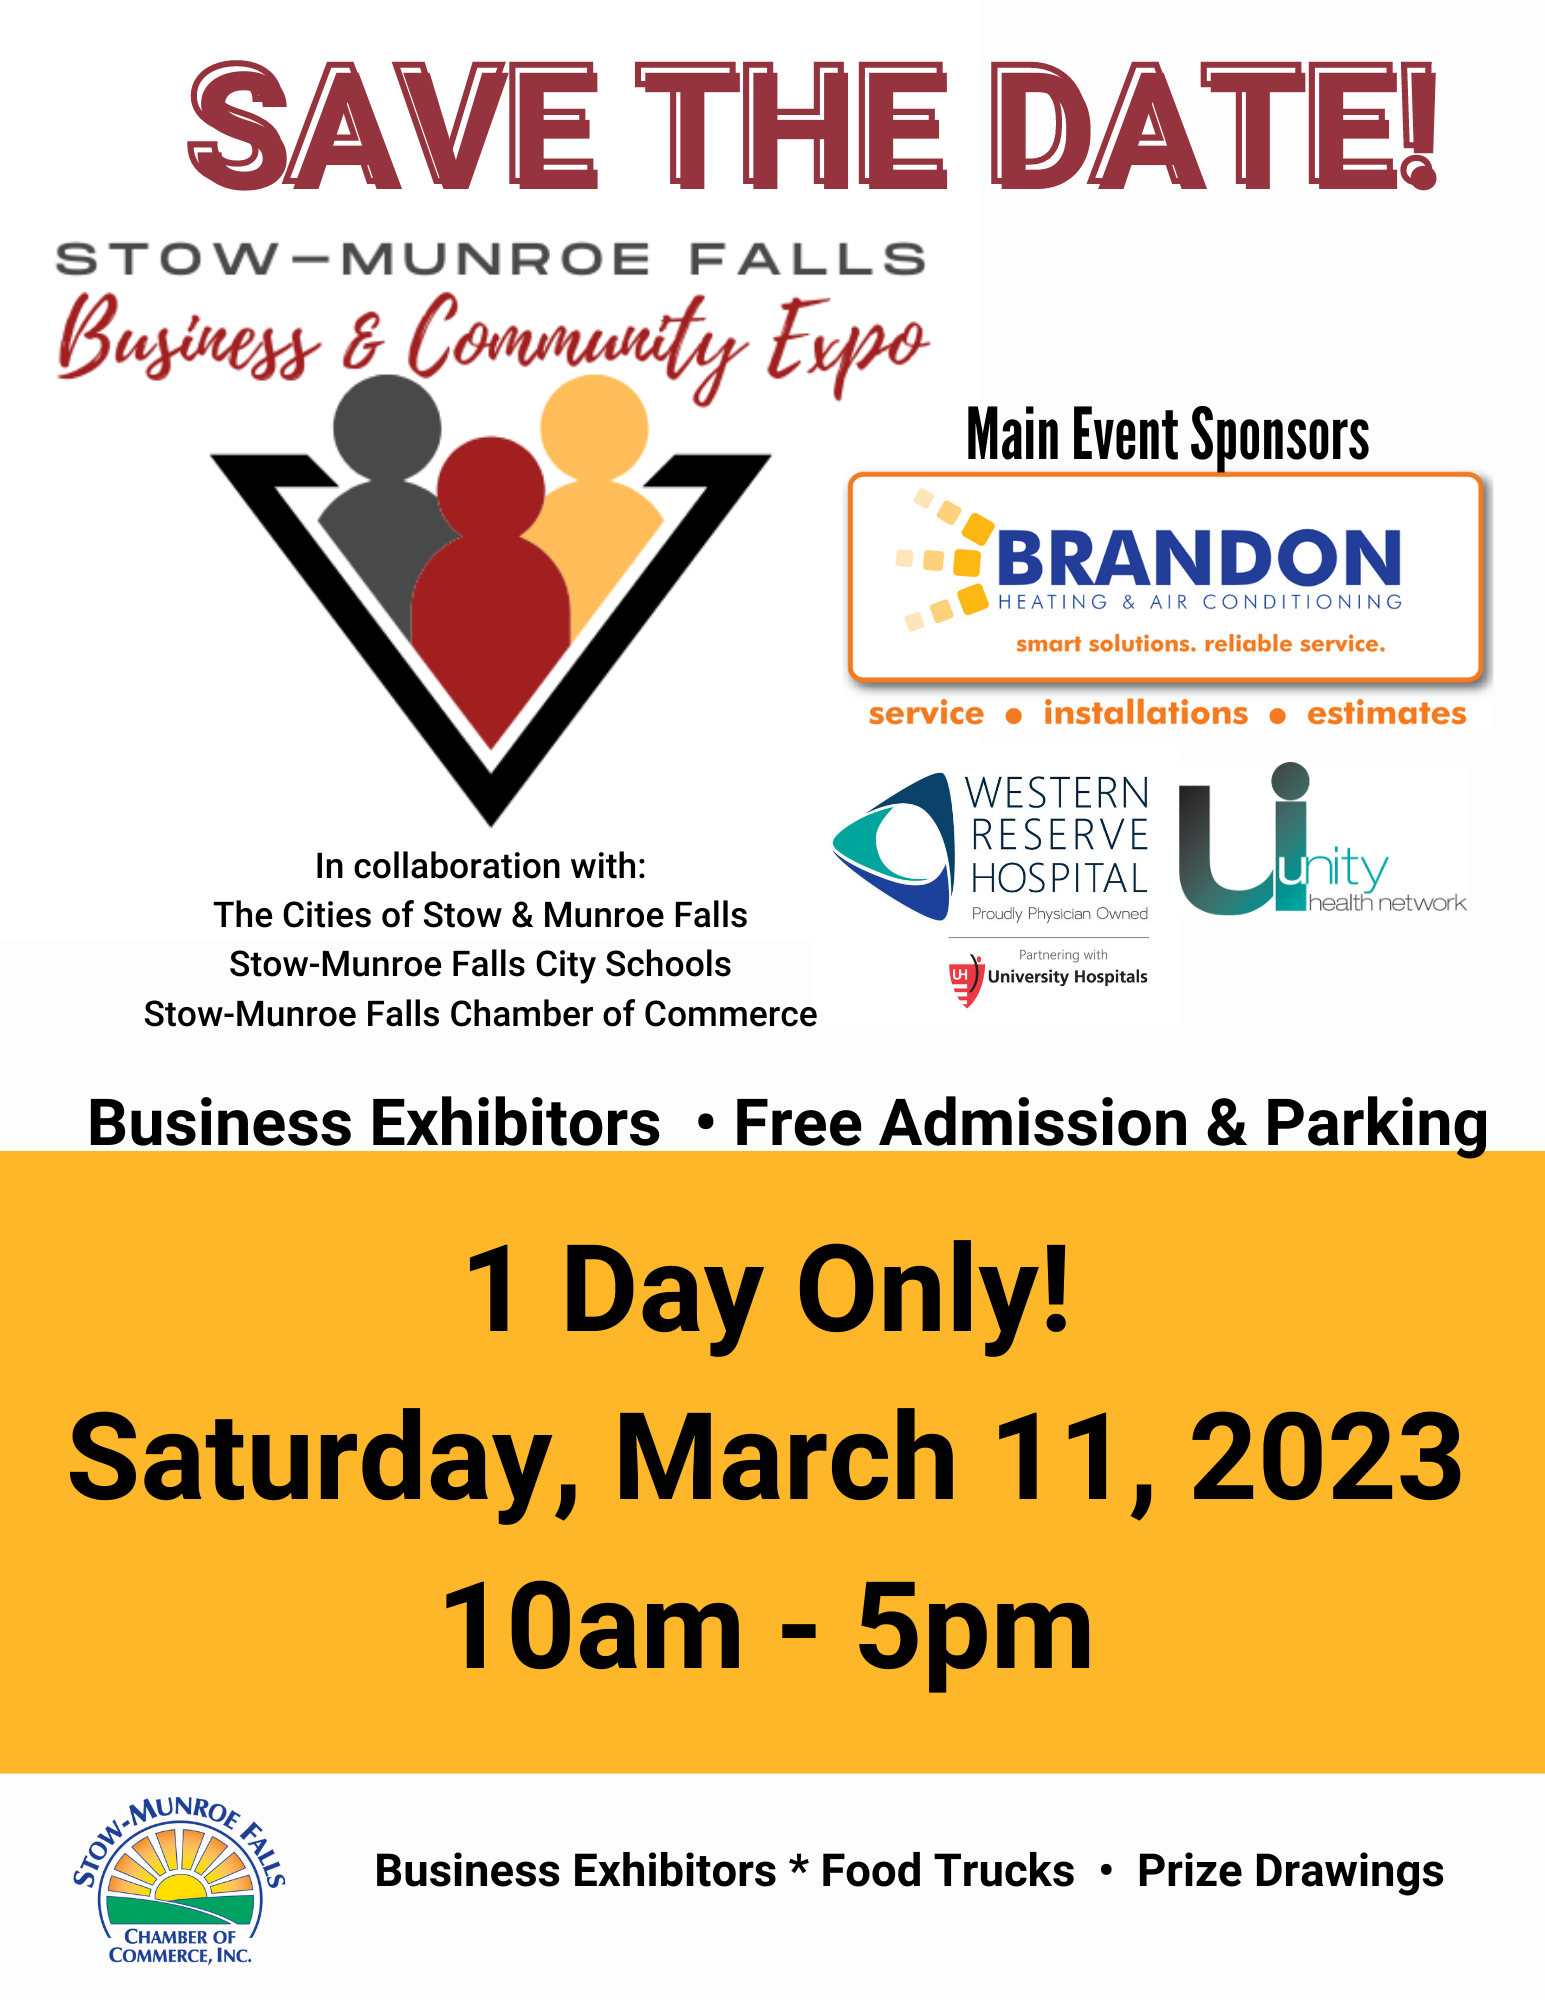 The Stow-Munroe Falls Business and Community Expo